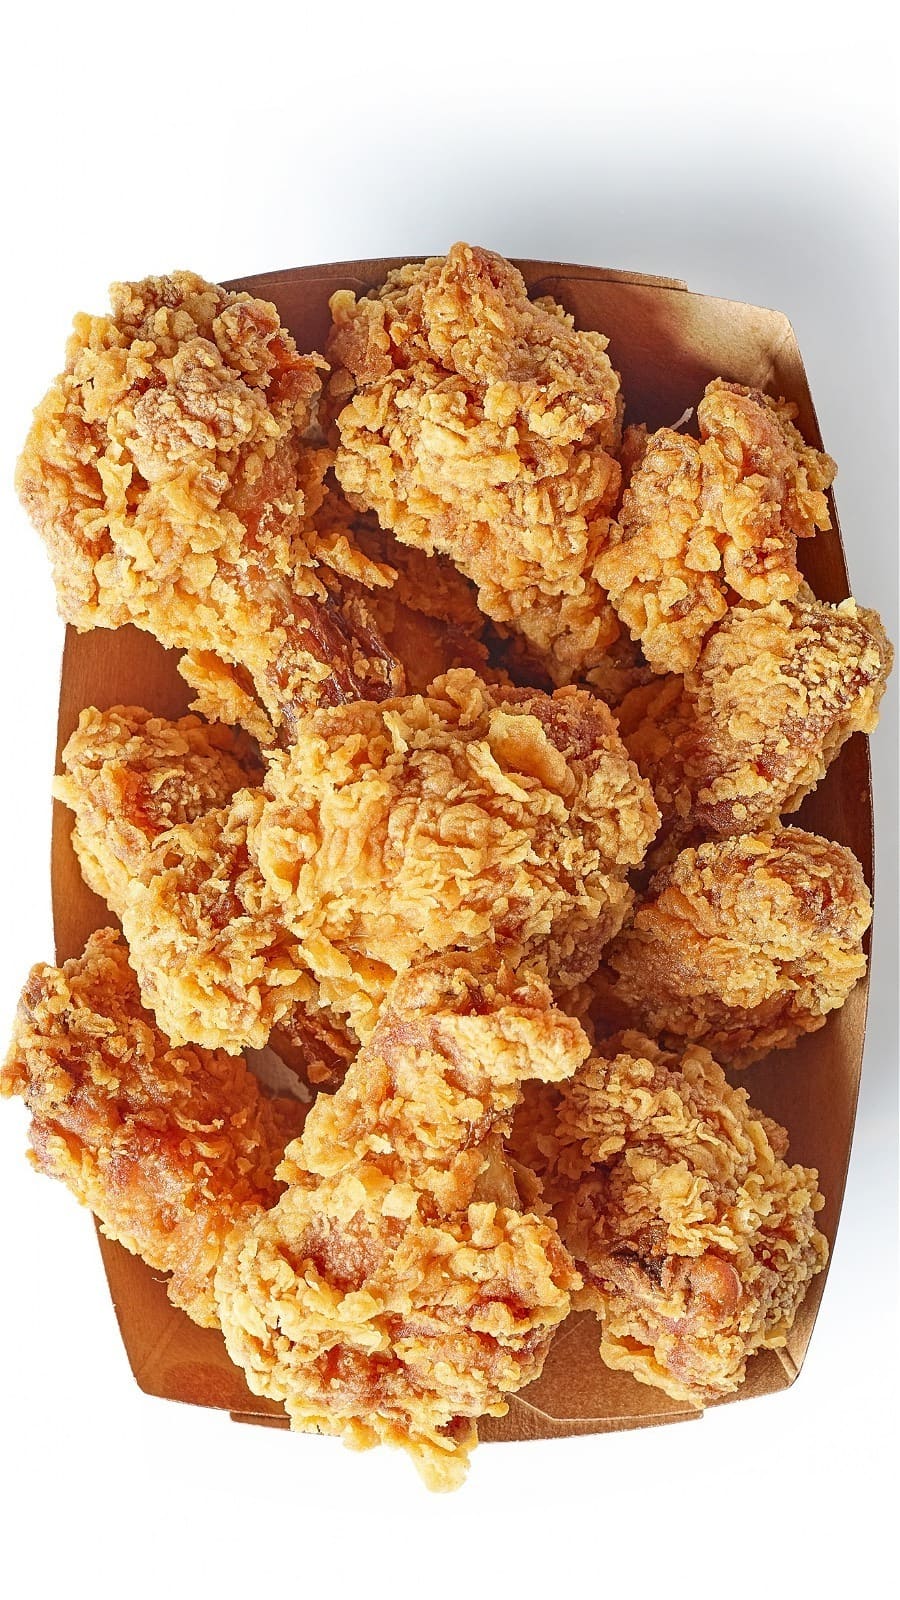 Fried chicken in container